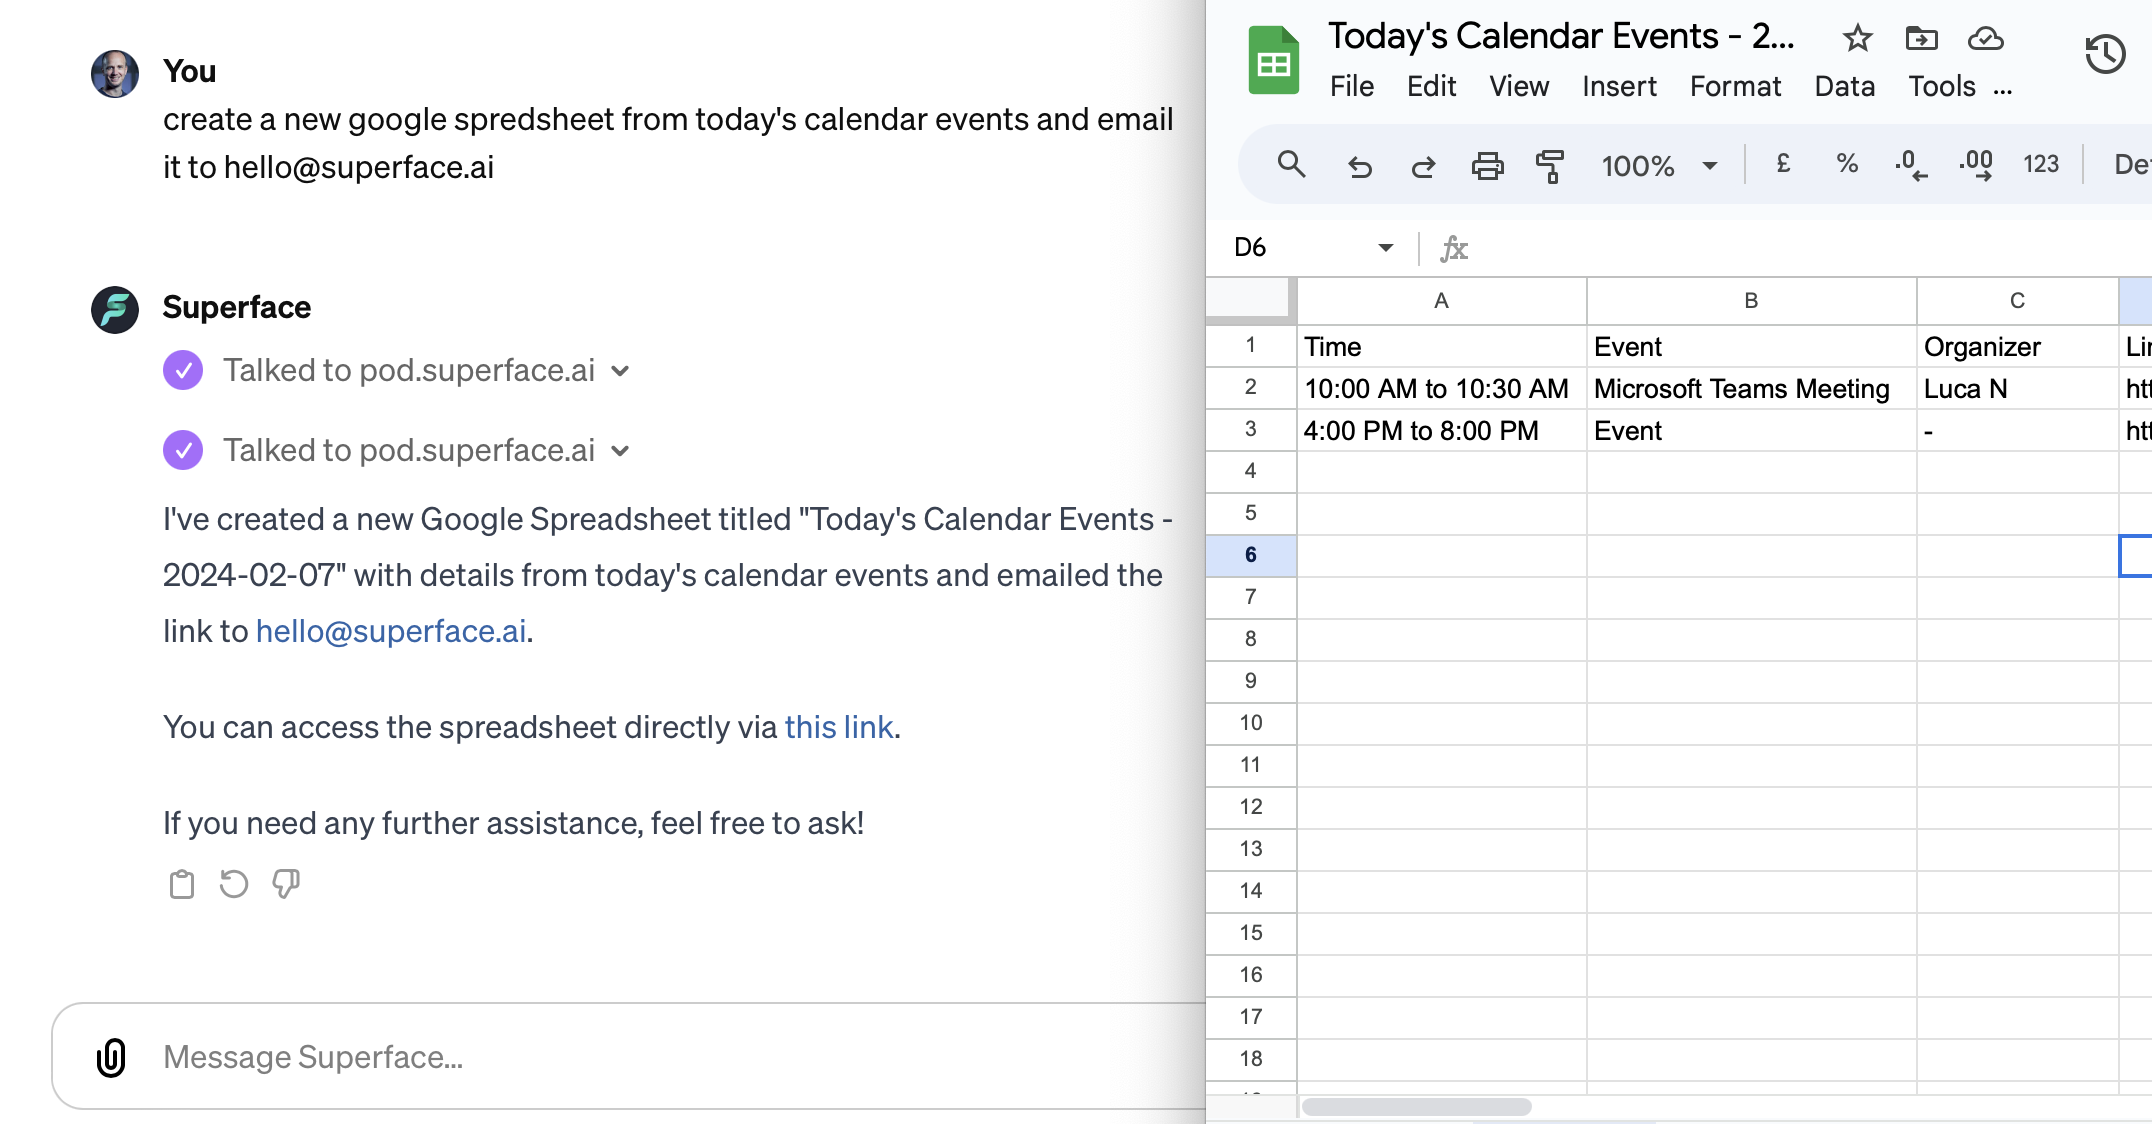 Today's calendar events brought in directly from Google Calendar